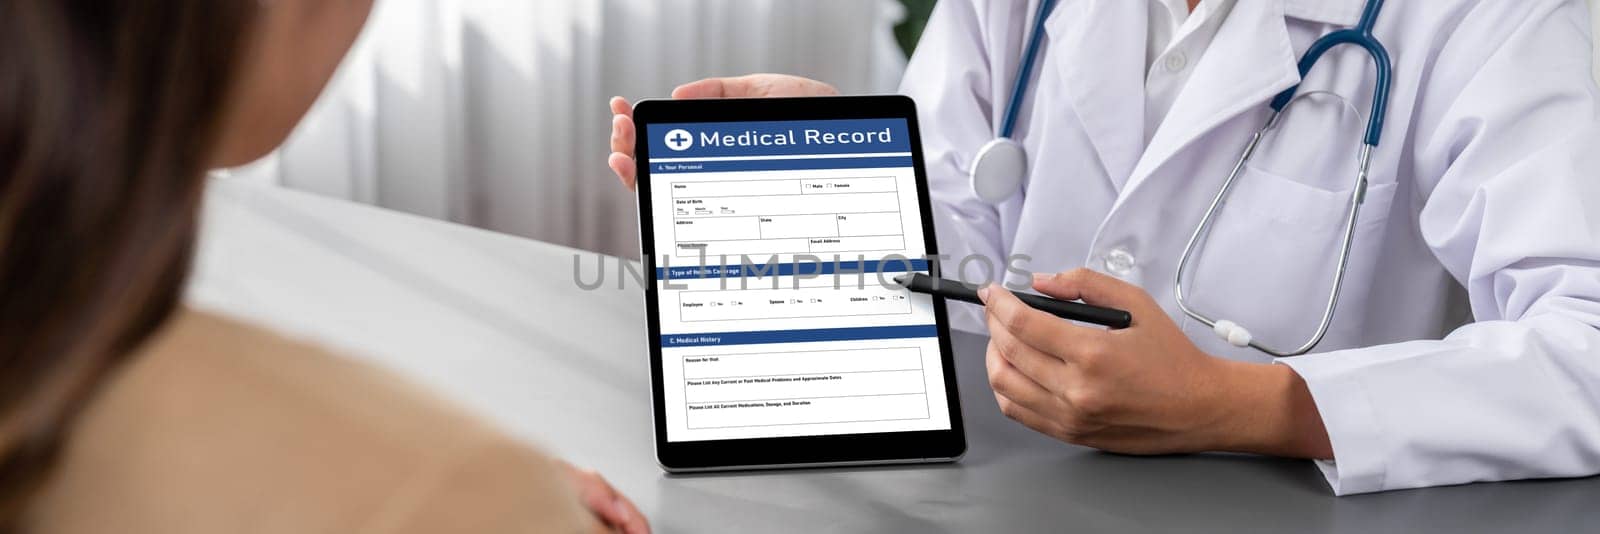 Doctor show medical diagnosis report on tablet to young patient. Neoteric by biancoblue